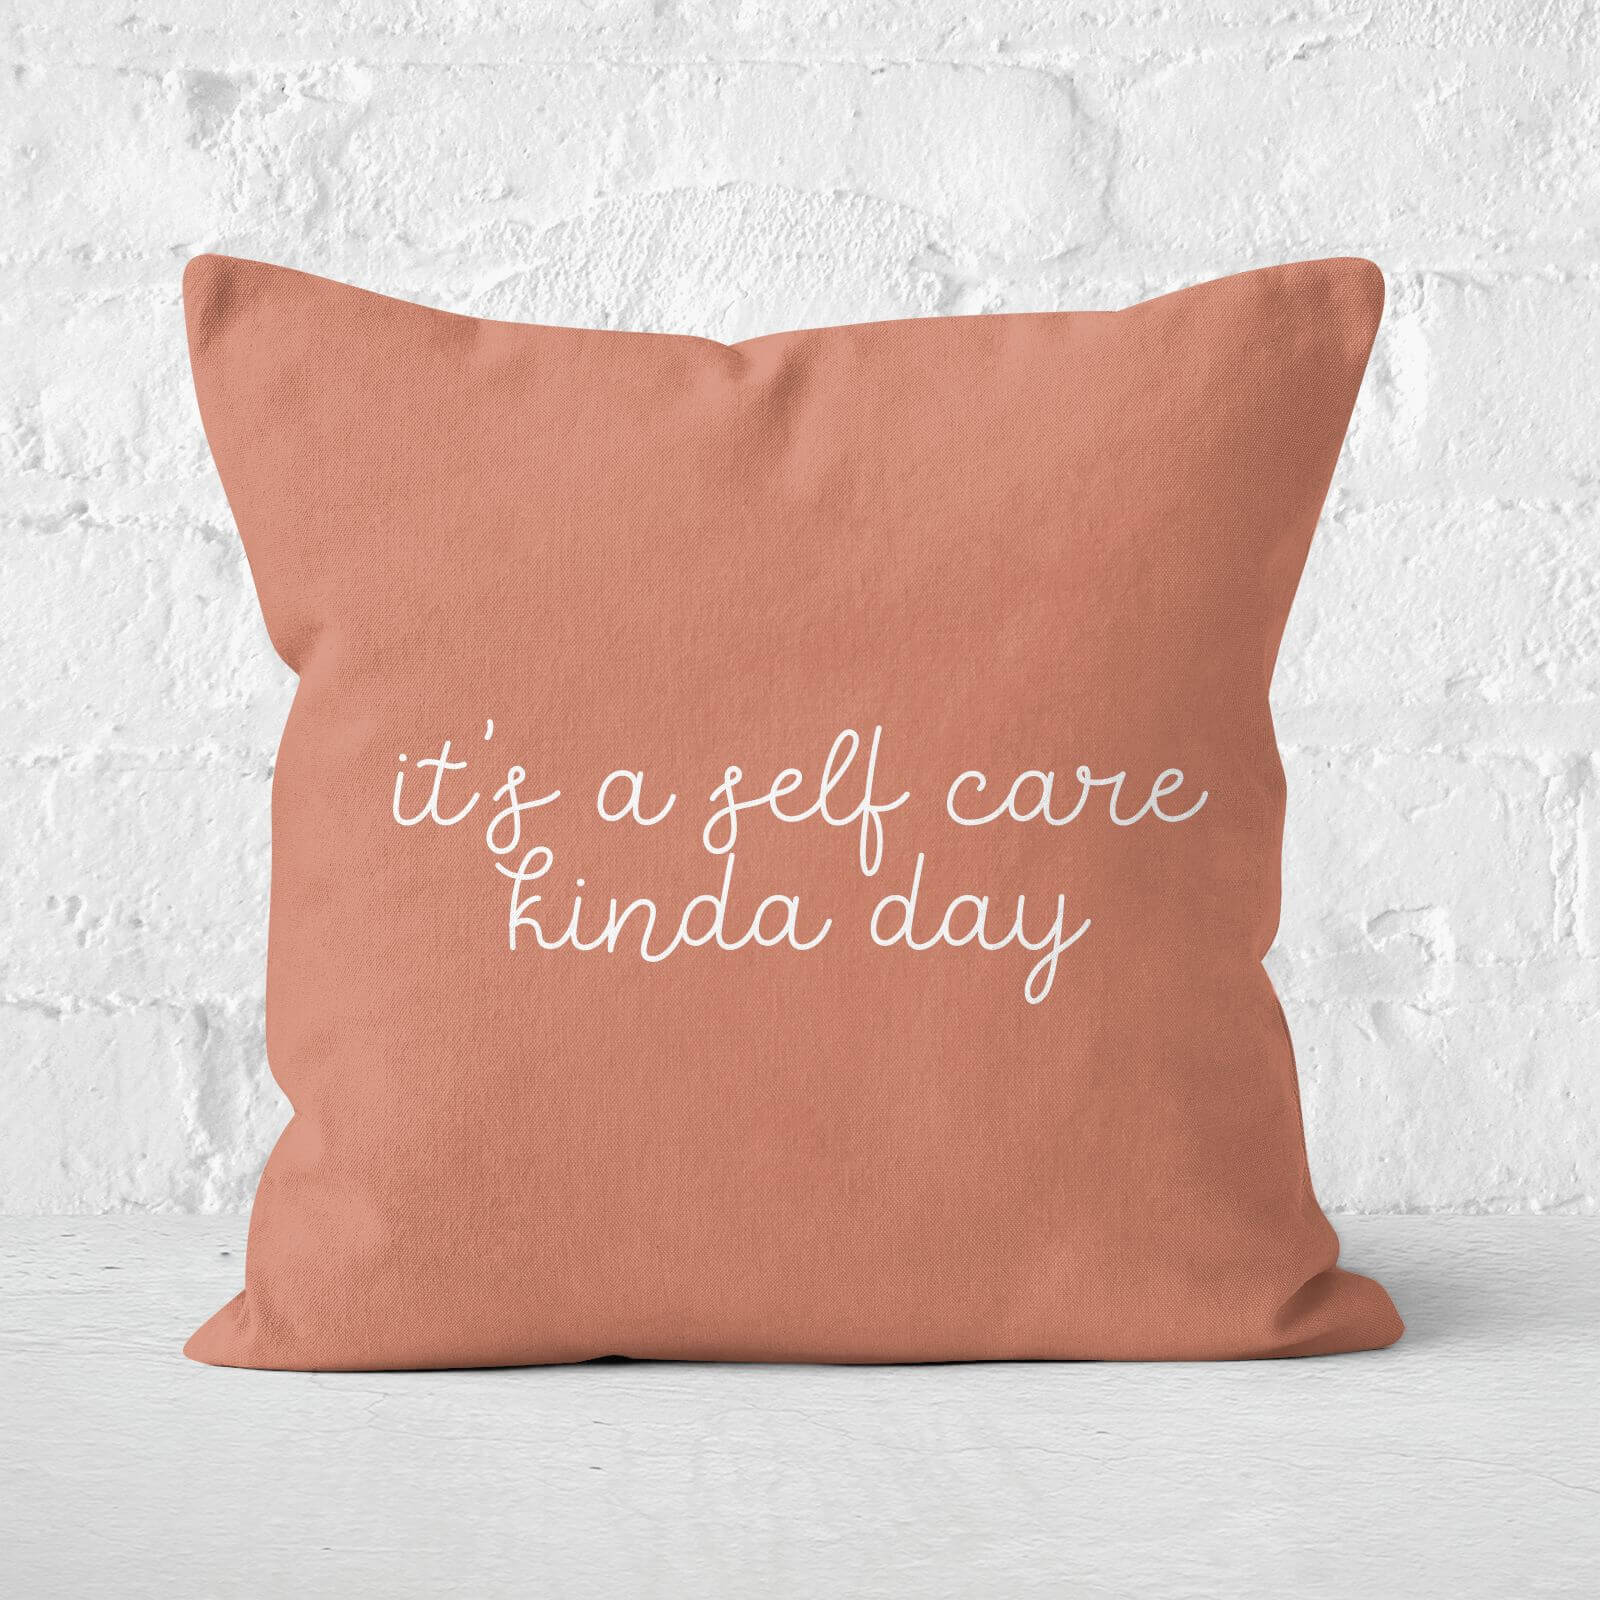 It's A Self Care Kinda Day Square Cushion - 60x60cm - Soft Touch